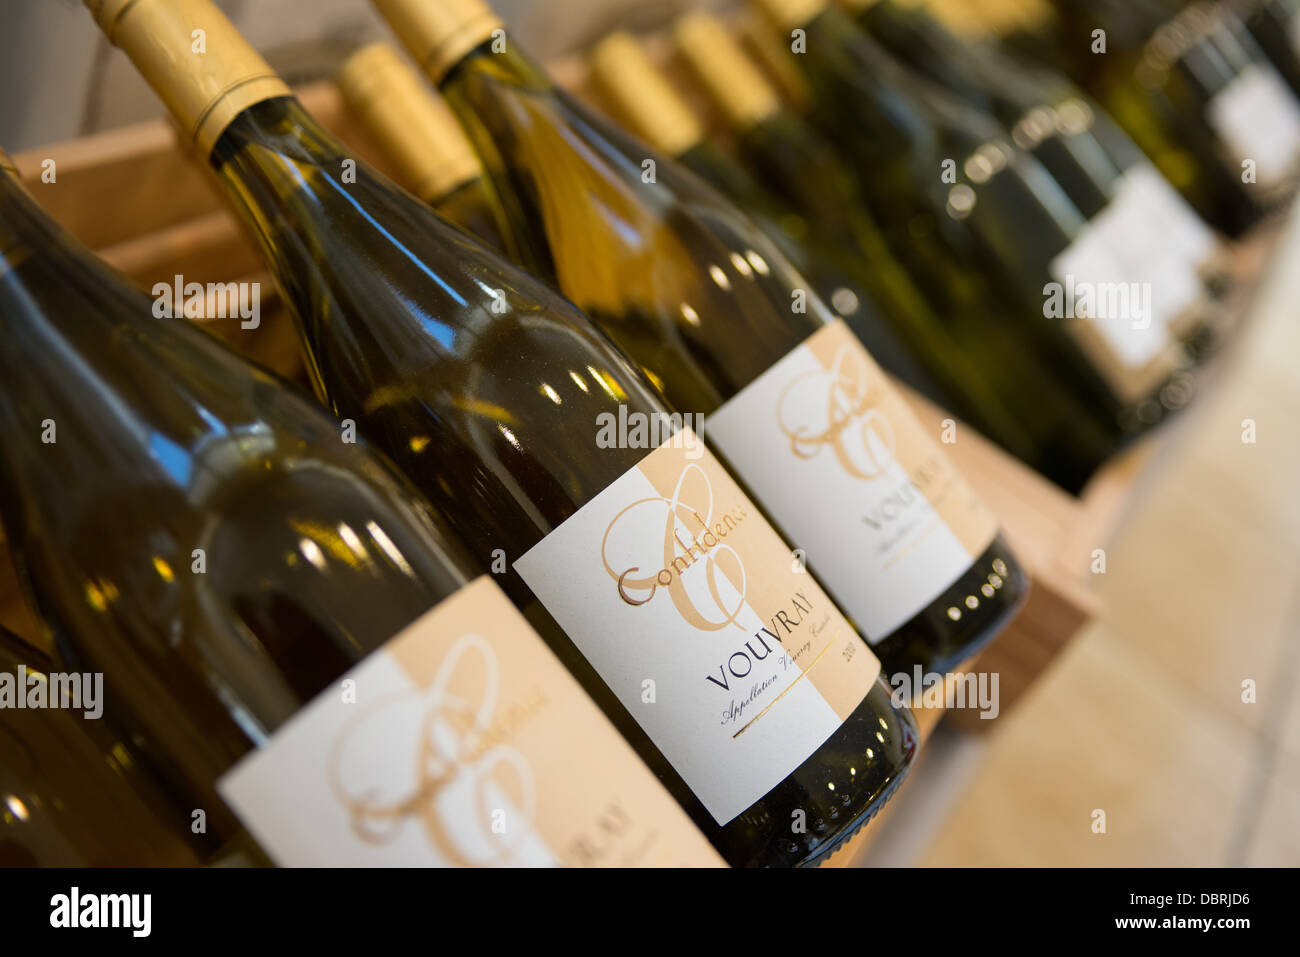 Bottles of wine on display & for sale in the shop at the Vouvray wine cellars in the Loire Valley, France Stock Photo